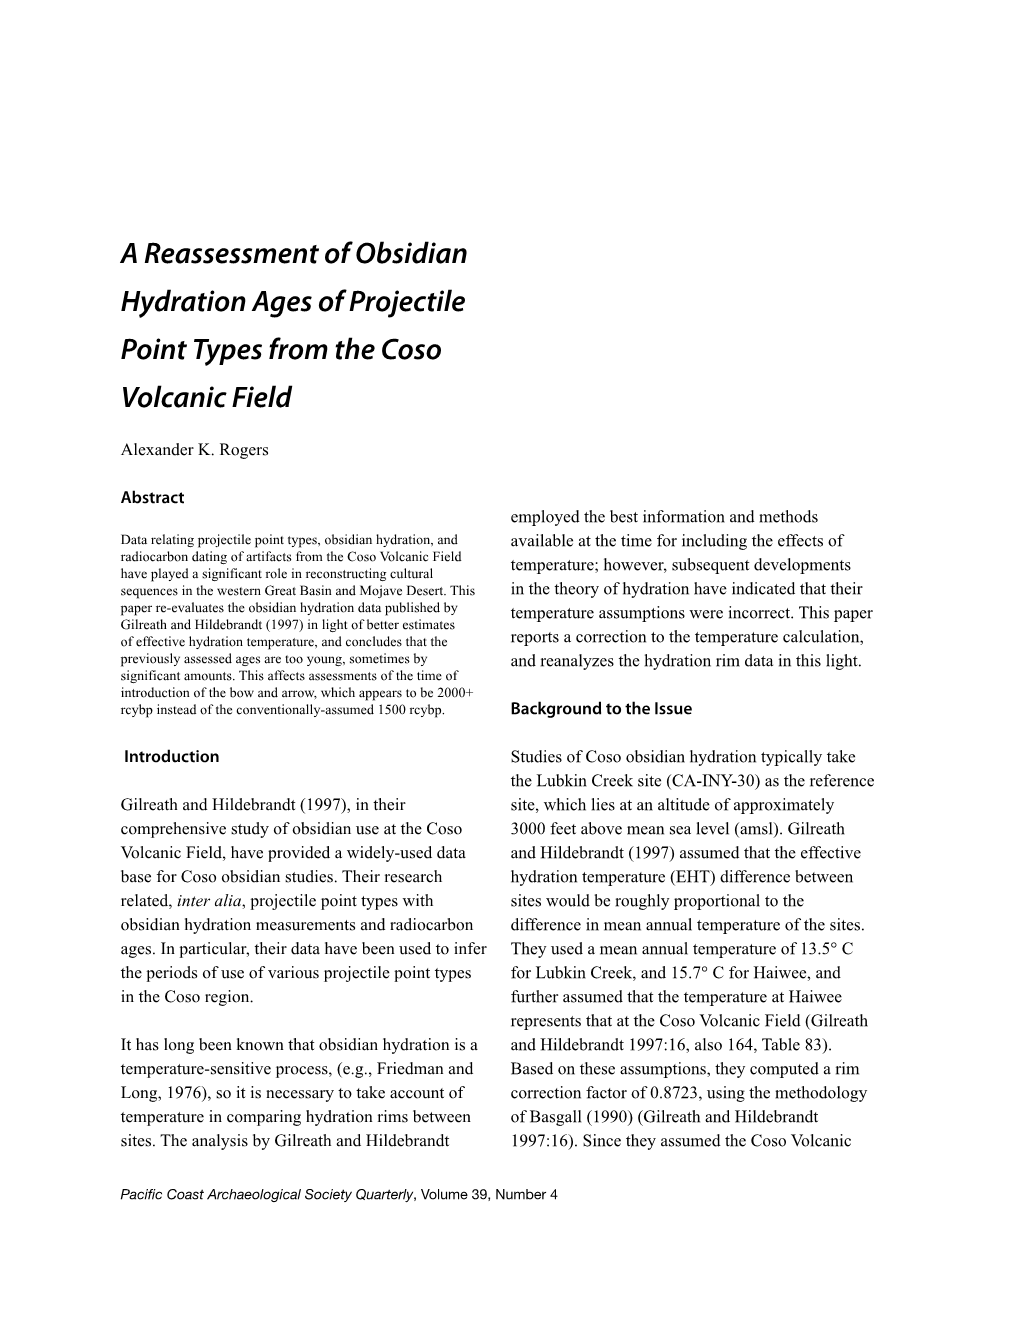 A Reassessment of Obsidian Hydration Ages of Projectile Point Types from the Coso Volcanic Field